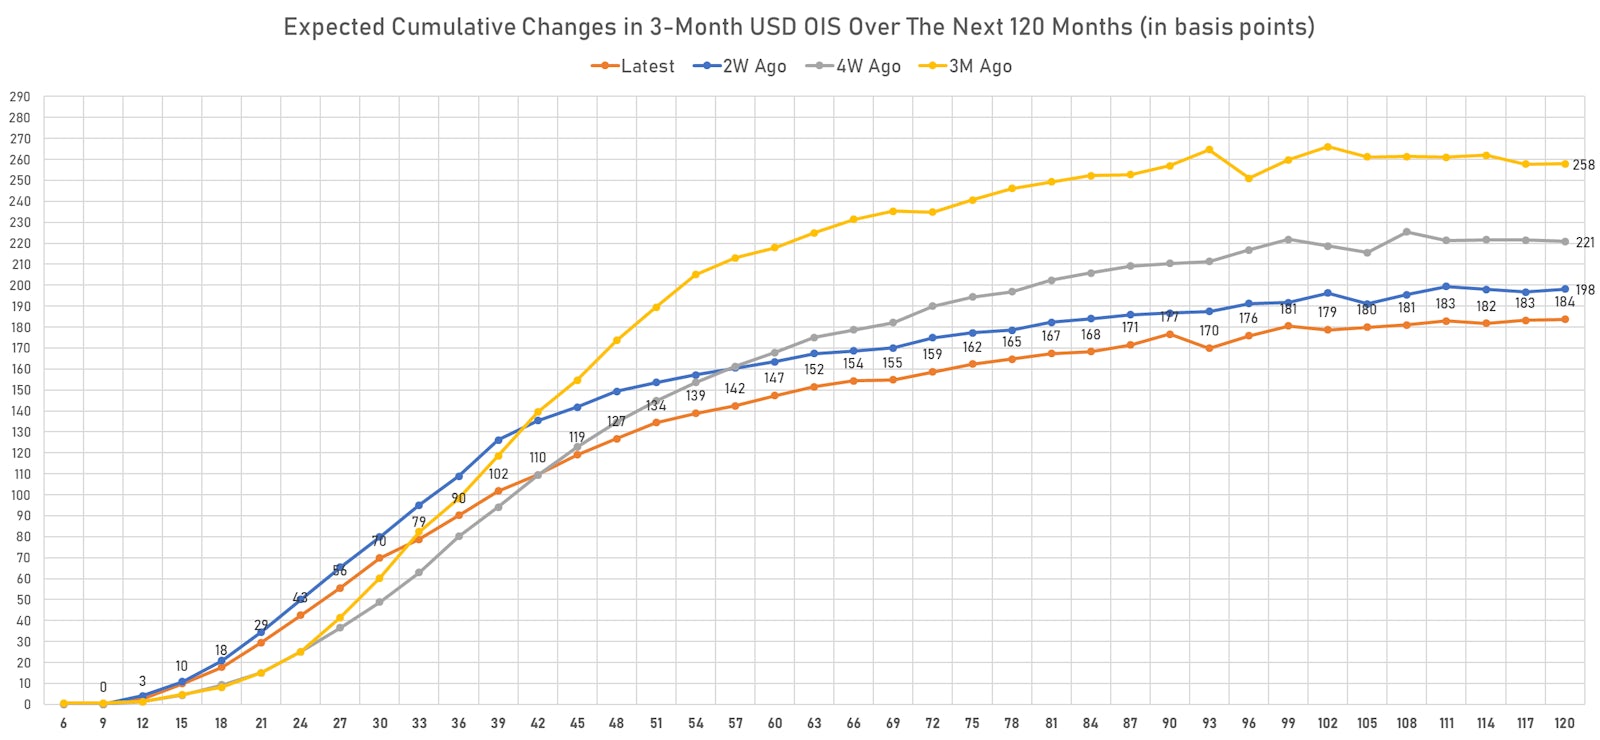 Rate hikes priced into the 3-Month USD OIS Forward Curve | Sources: ϕpost, Refinitiv data